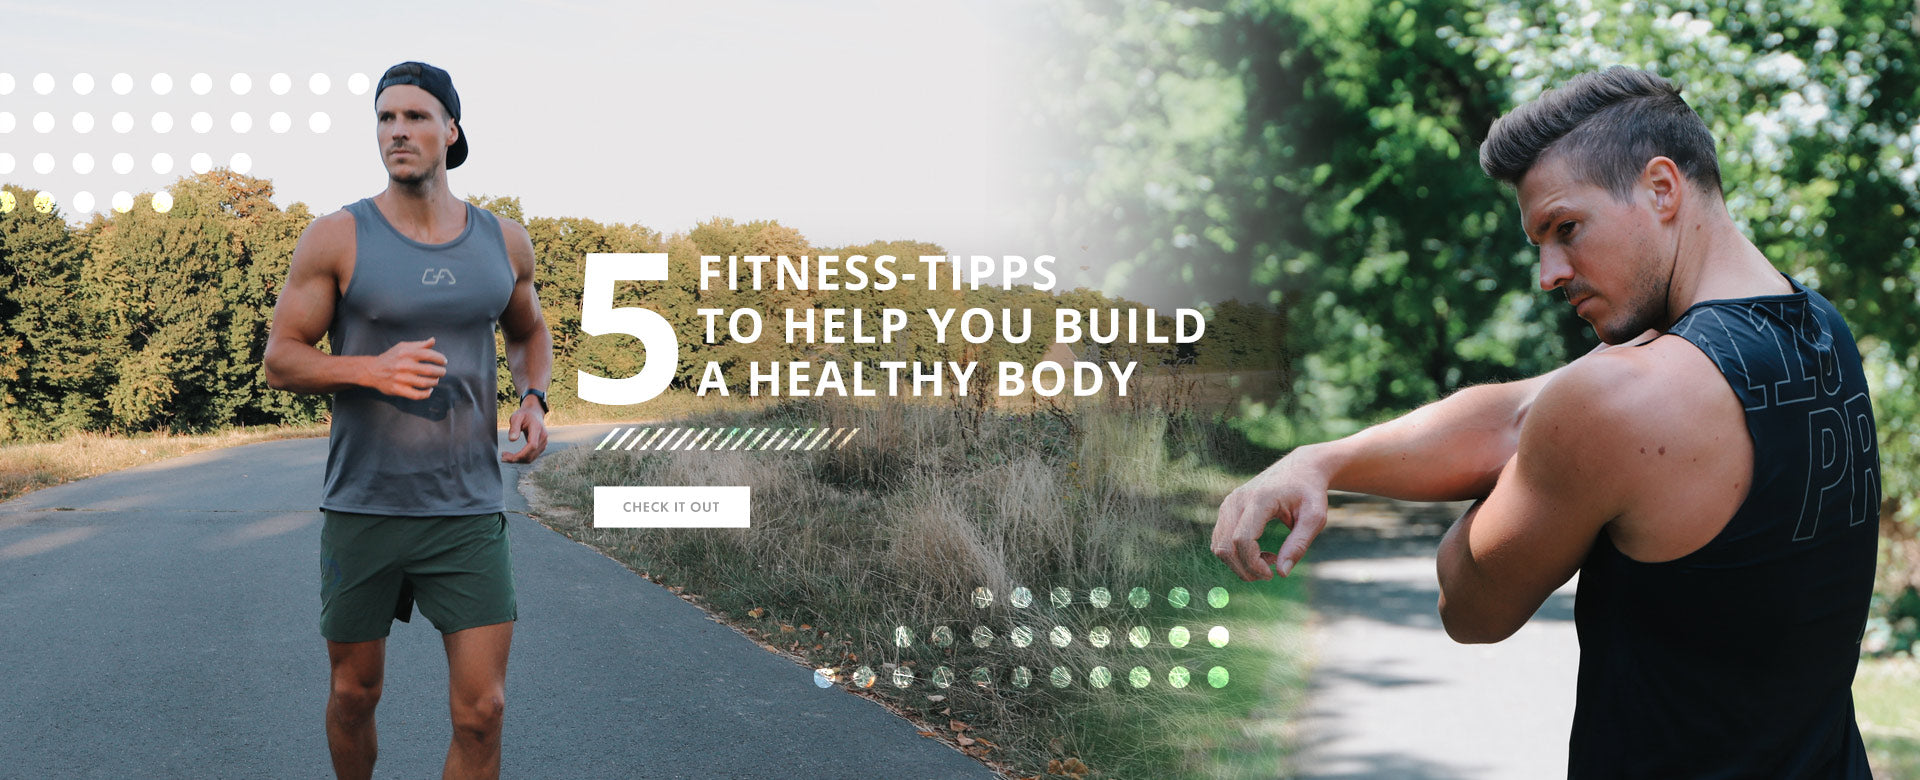 5 Fitness Tips to Help You Build a Healthy Body – Gym Aesthetics